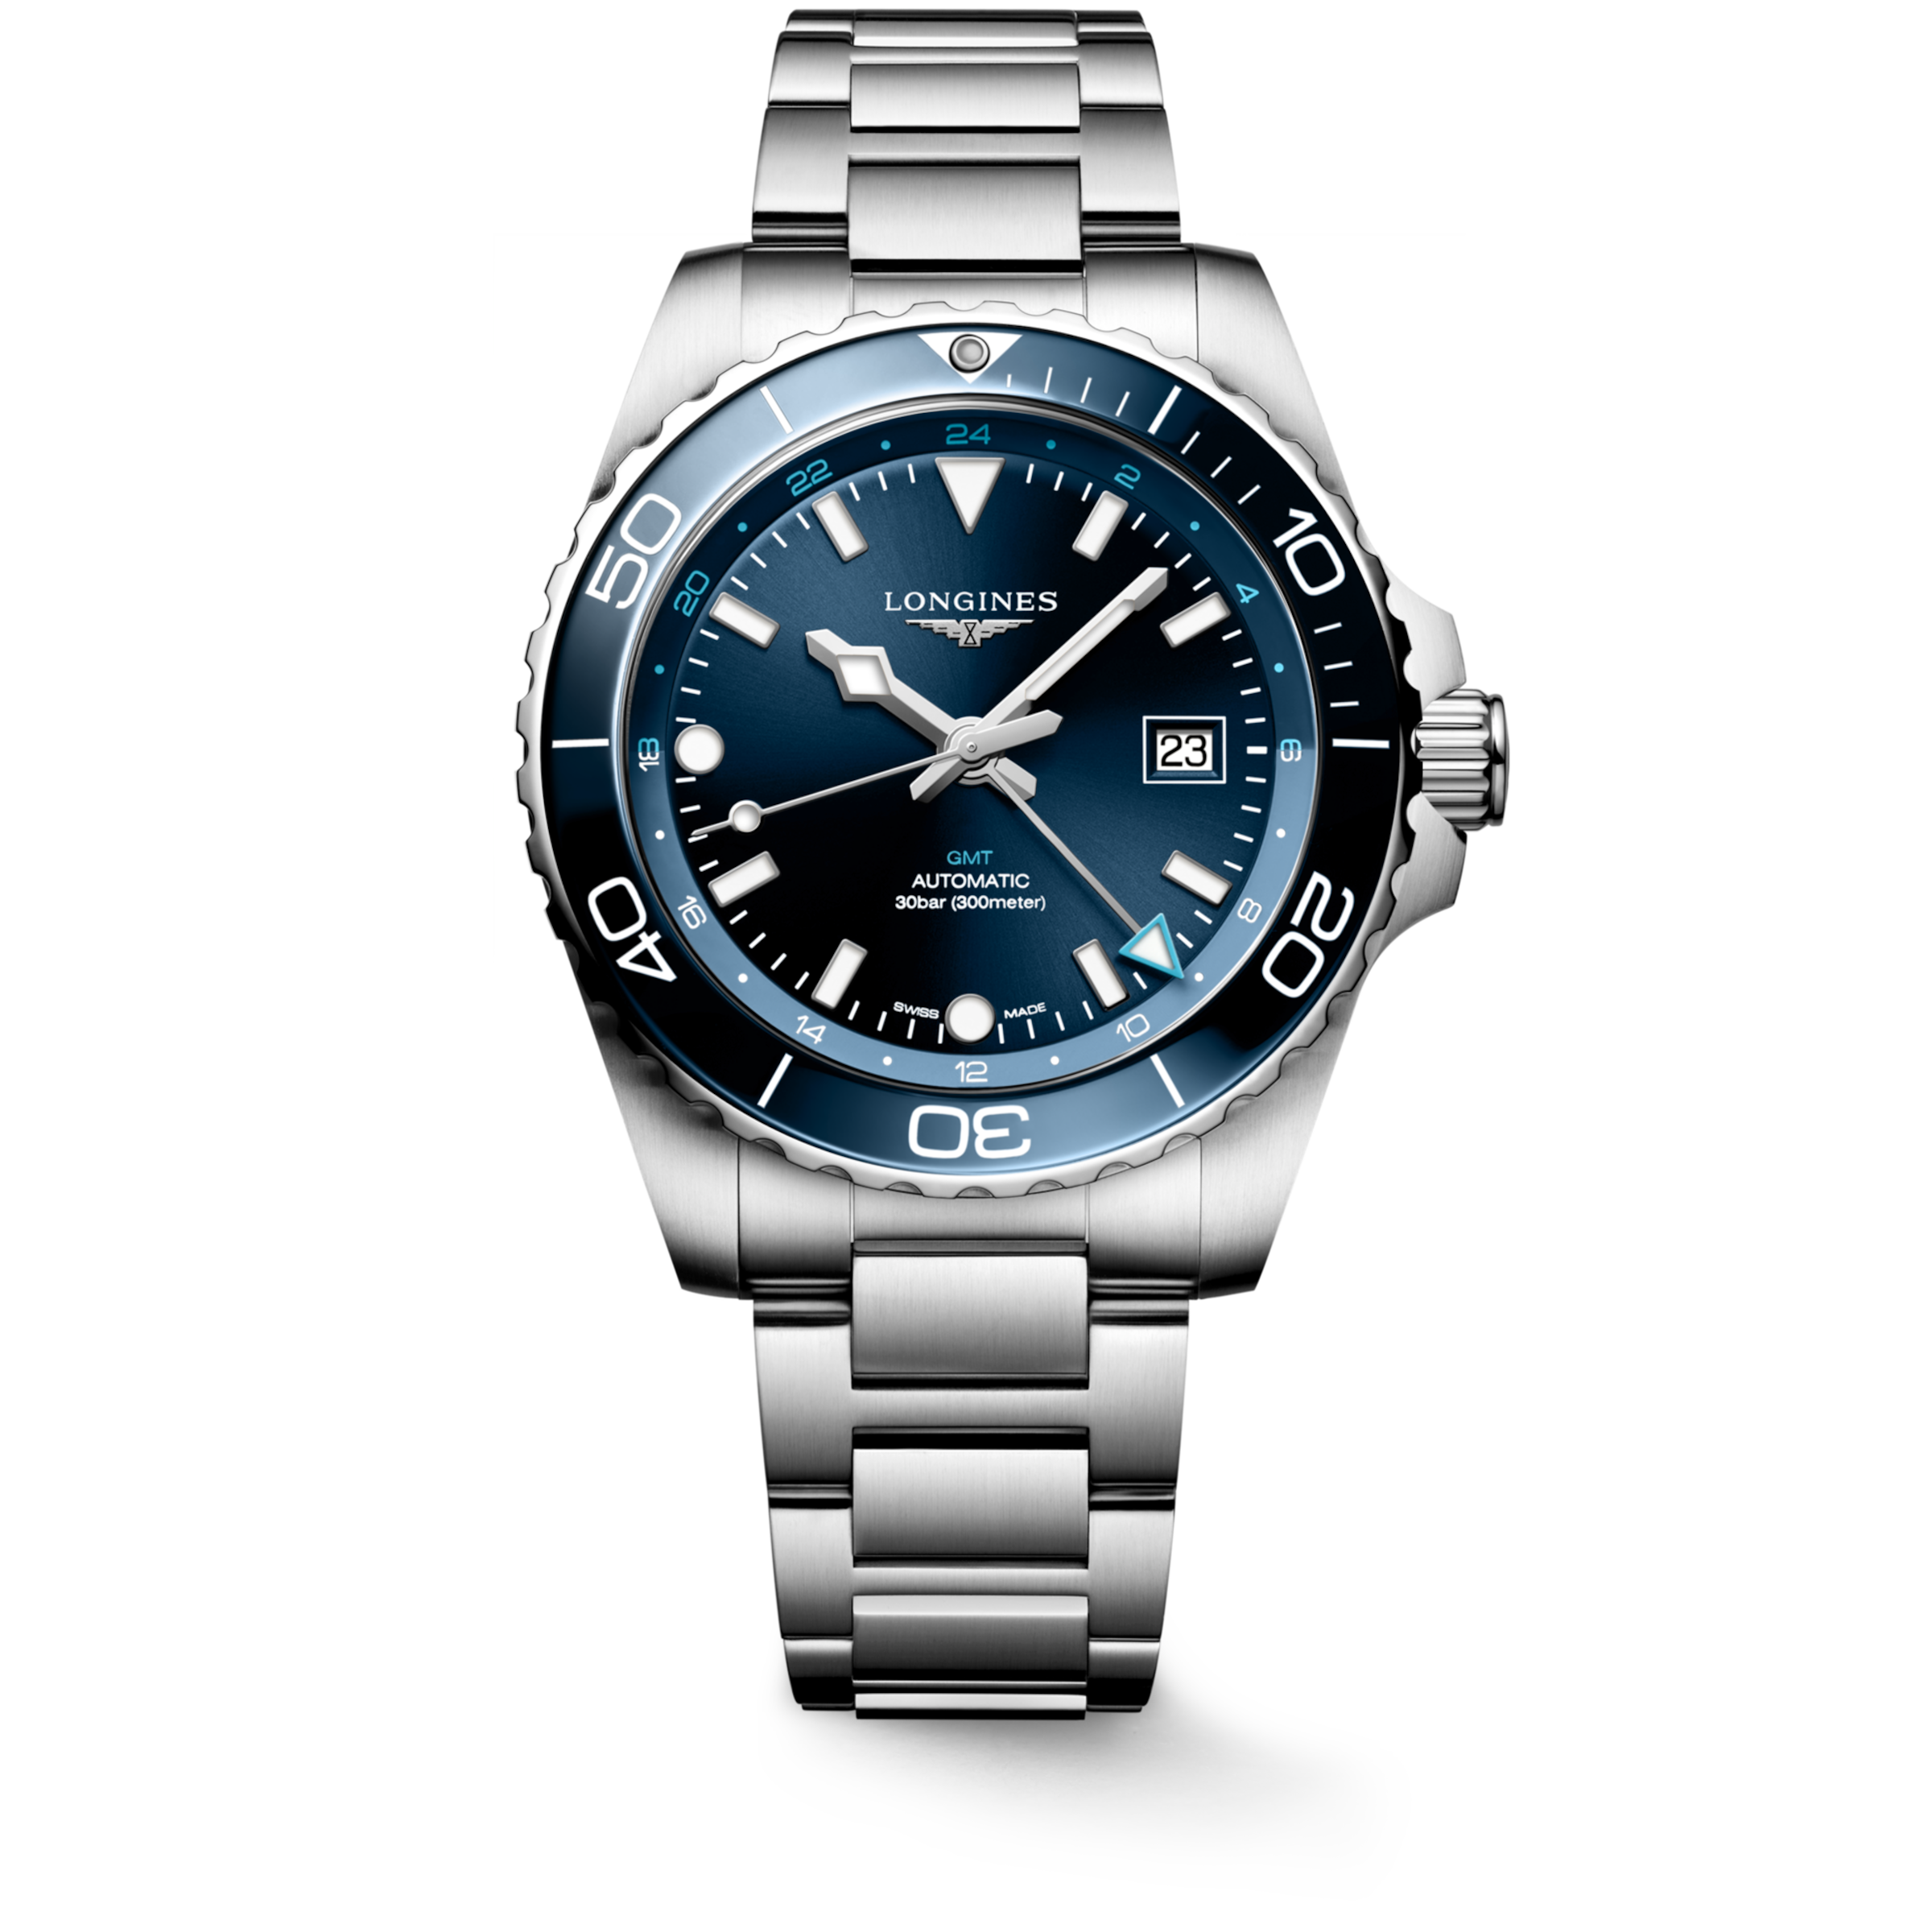 Longines HYDROCONQUEST Automatic Stainless steel and ceramic bezel Watch - L3.890.4.96.6